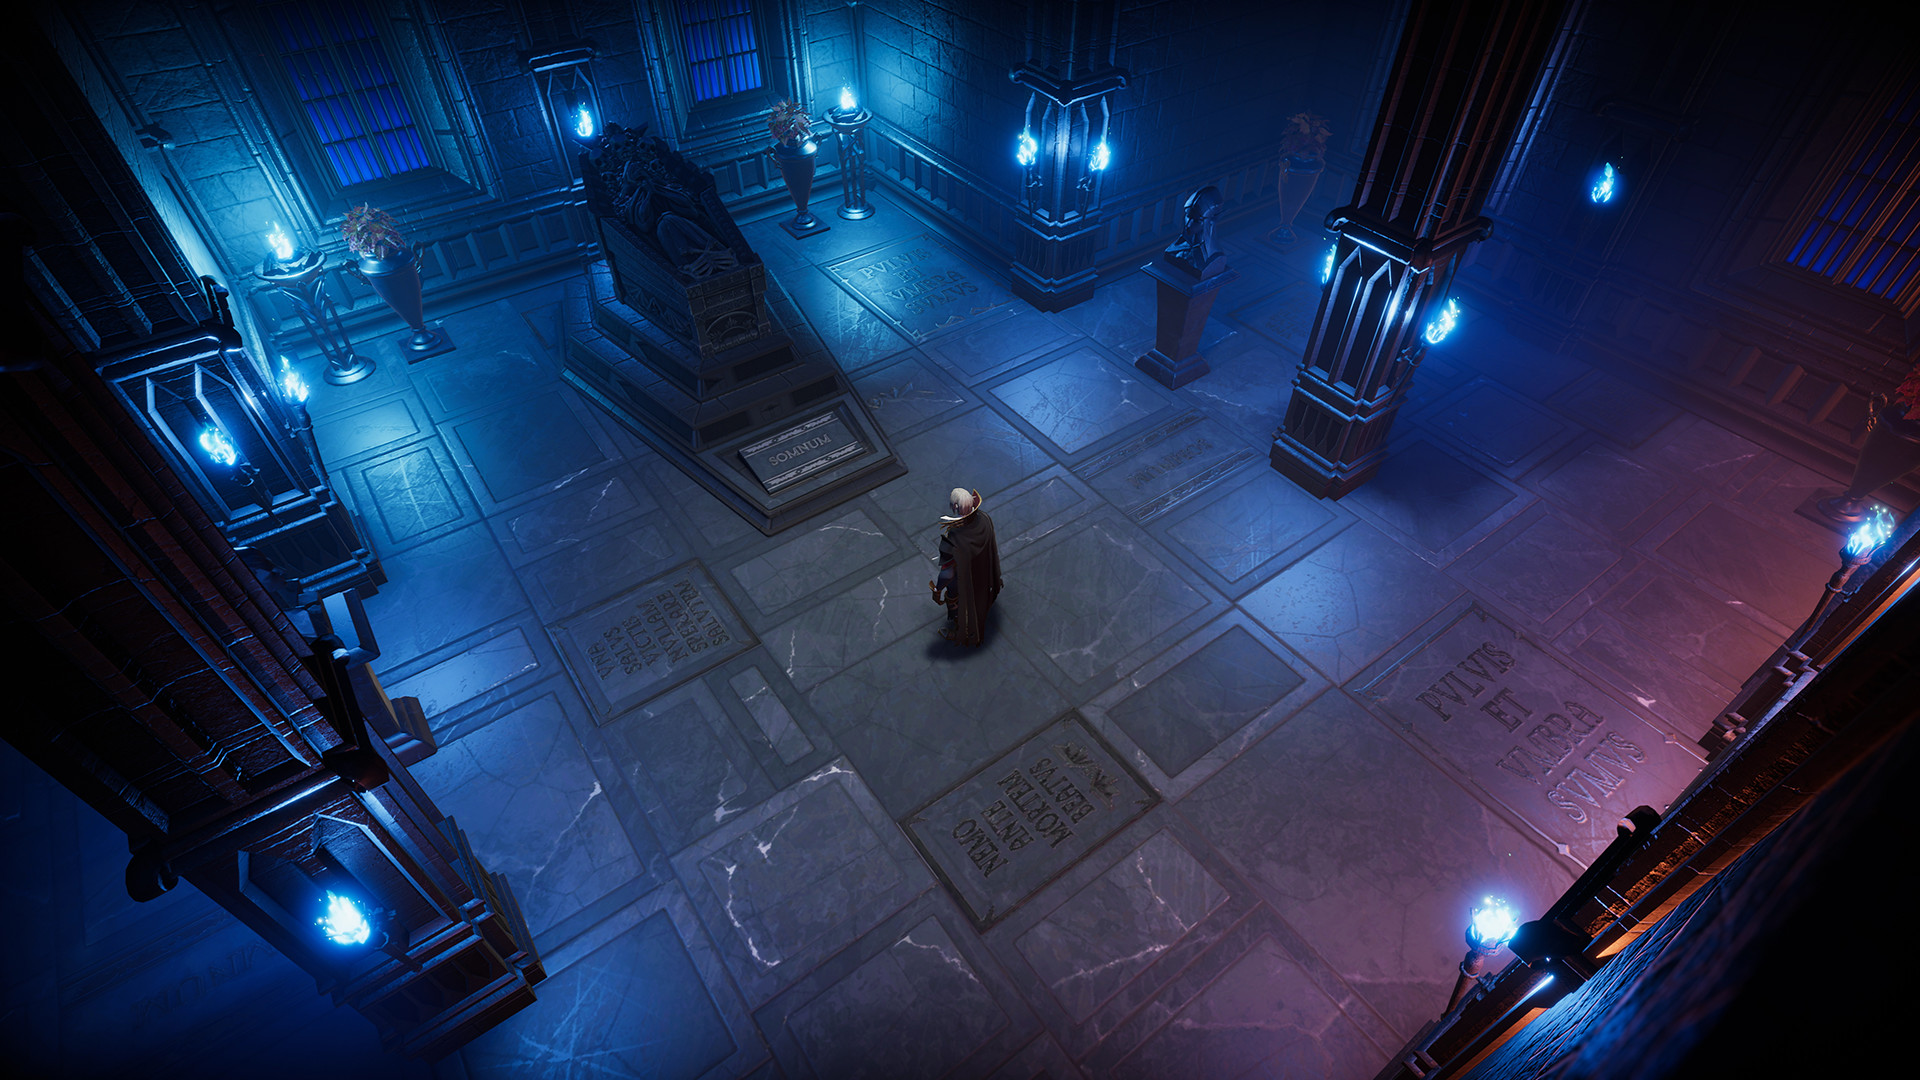 Throne and Liberty: 24 minutes of Console Gameplay - Throne and